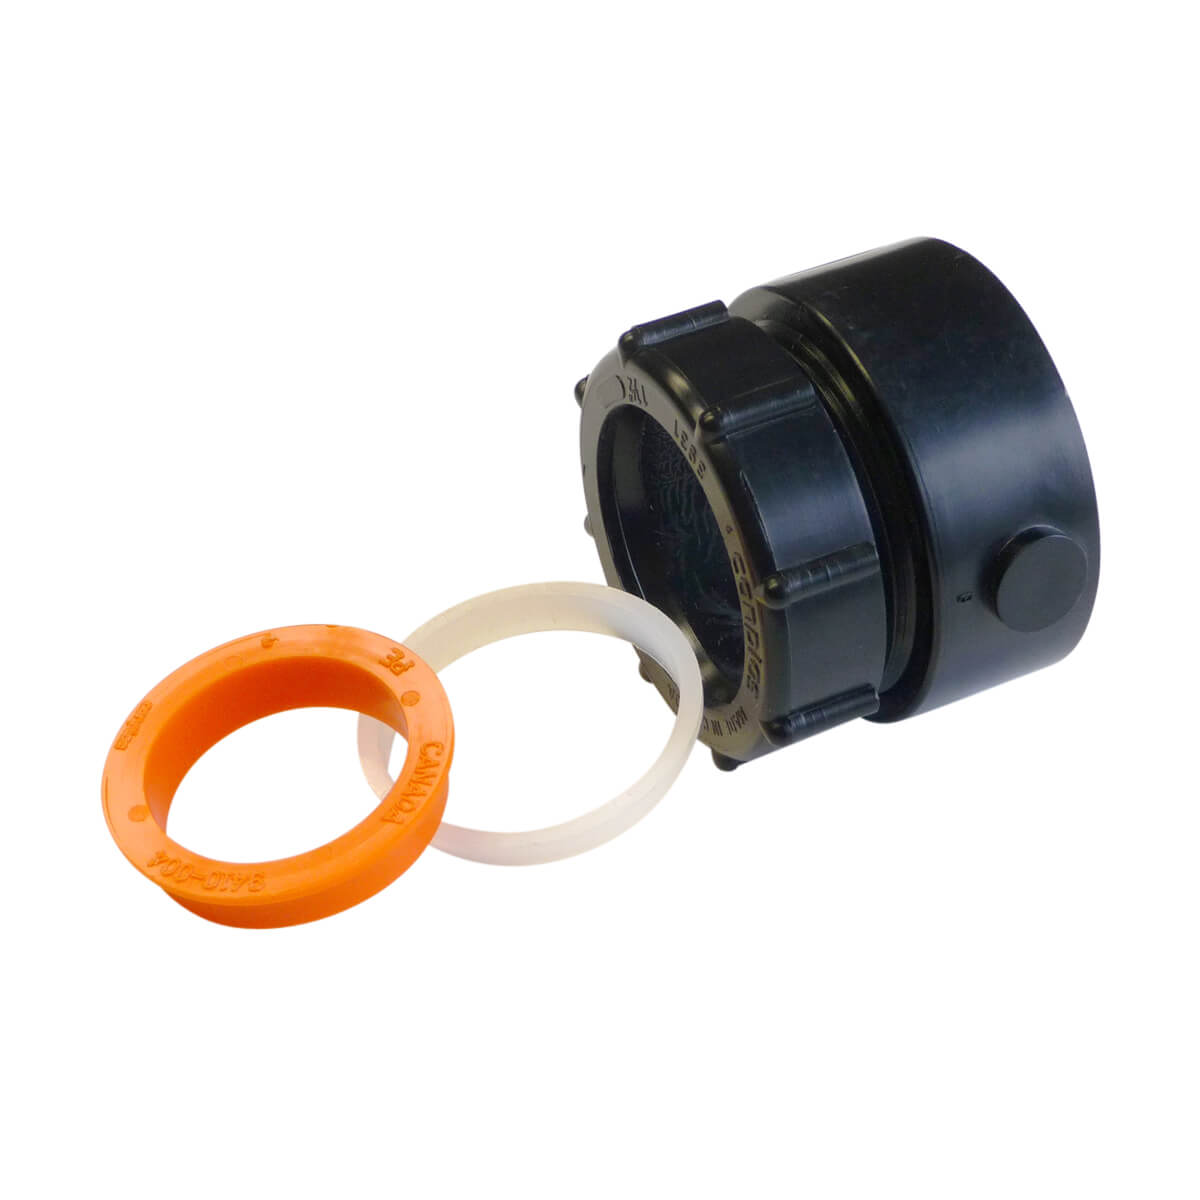 ABS-DWV 2-in-1 Combination Trap Adapter - Hub - 1-1/2-in